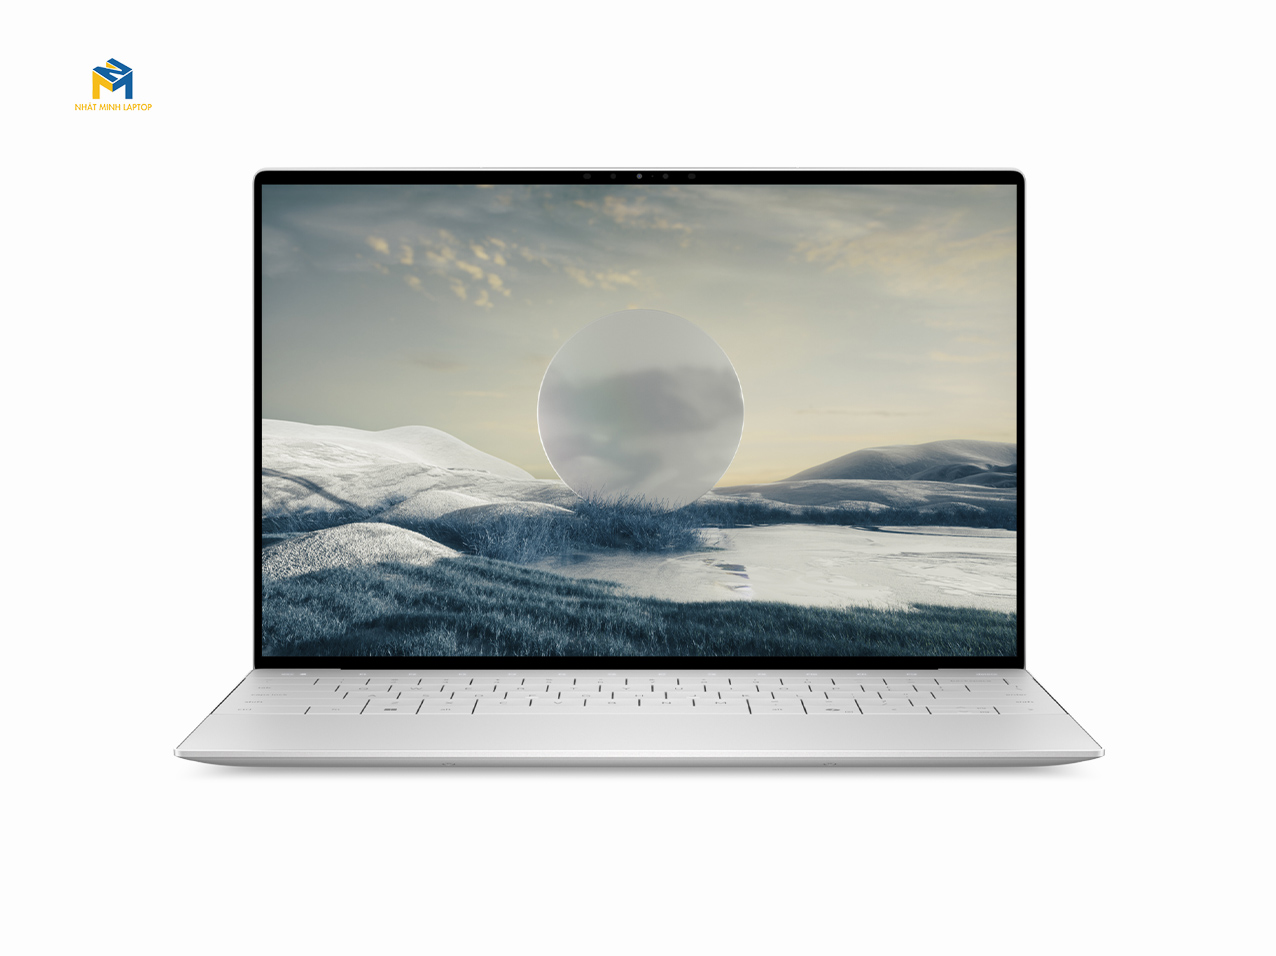 DELL XPS 13 9340